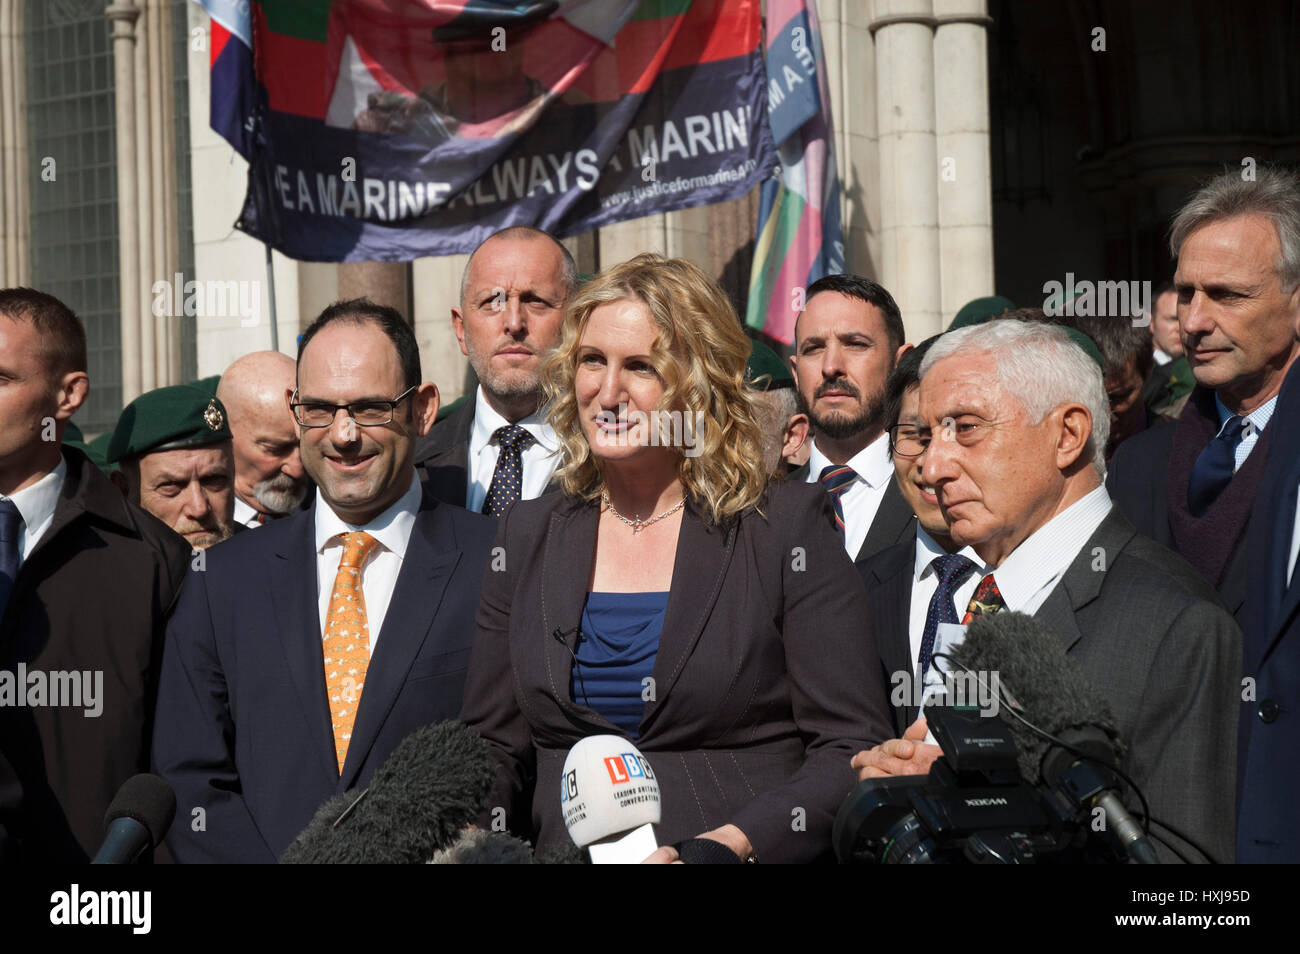 London, UK. 28th Mar, 2017. Supporters of marine Alexander Blackman. Claire Blackman wife of marine Alexander Blackman after his sentence at Royal Court. Credit: JOHNNY ARMSTEAD/Alamy Live News Stock Photo